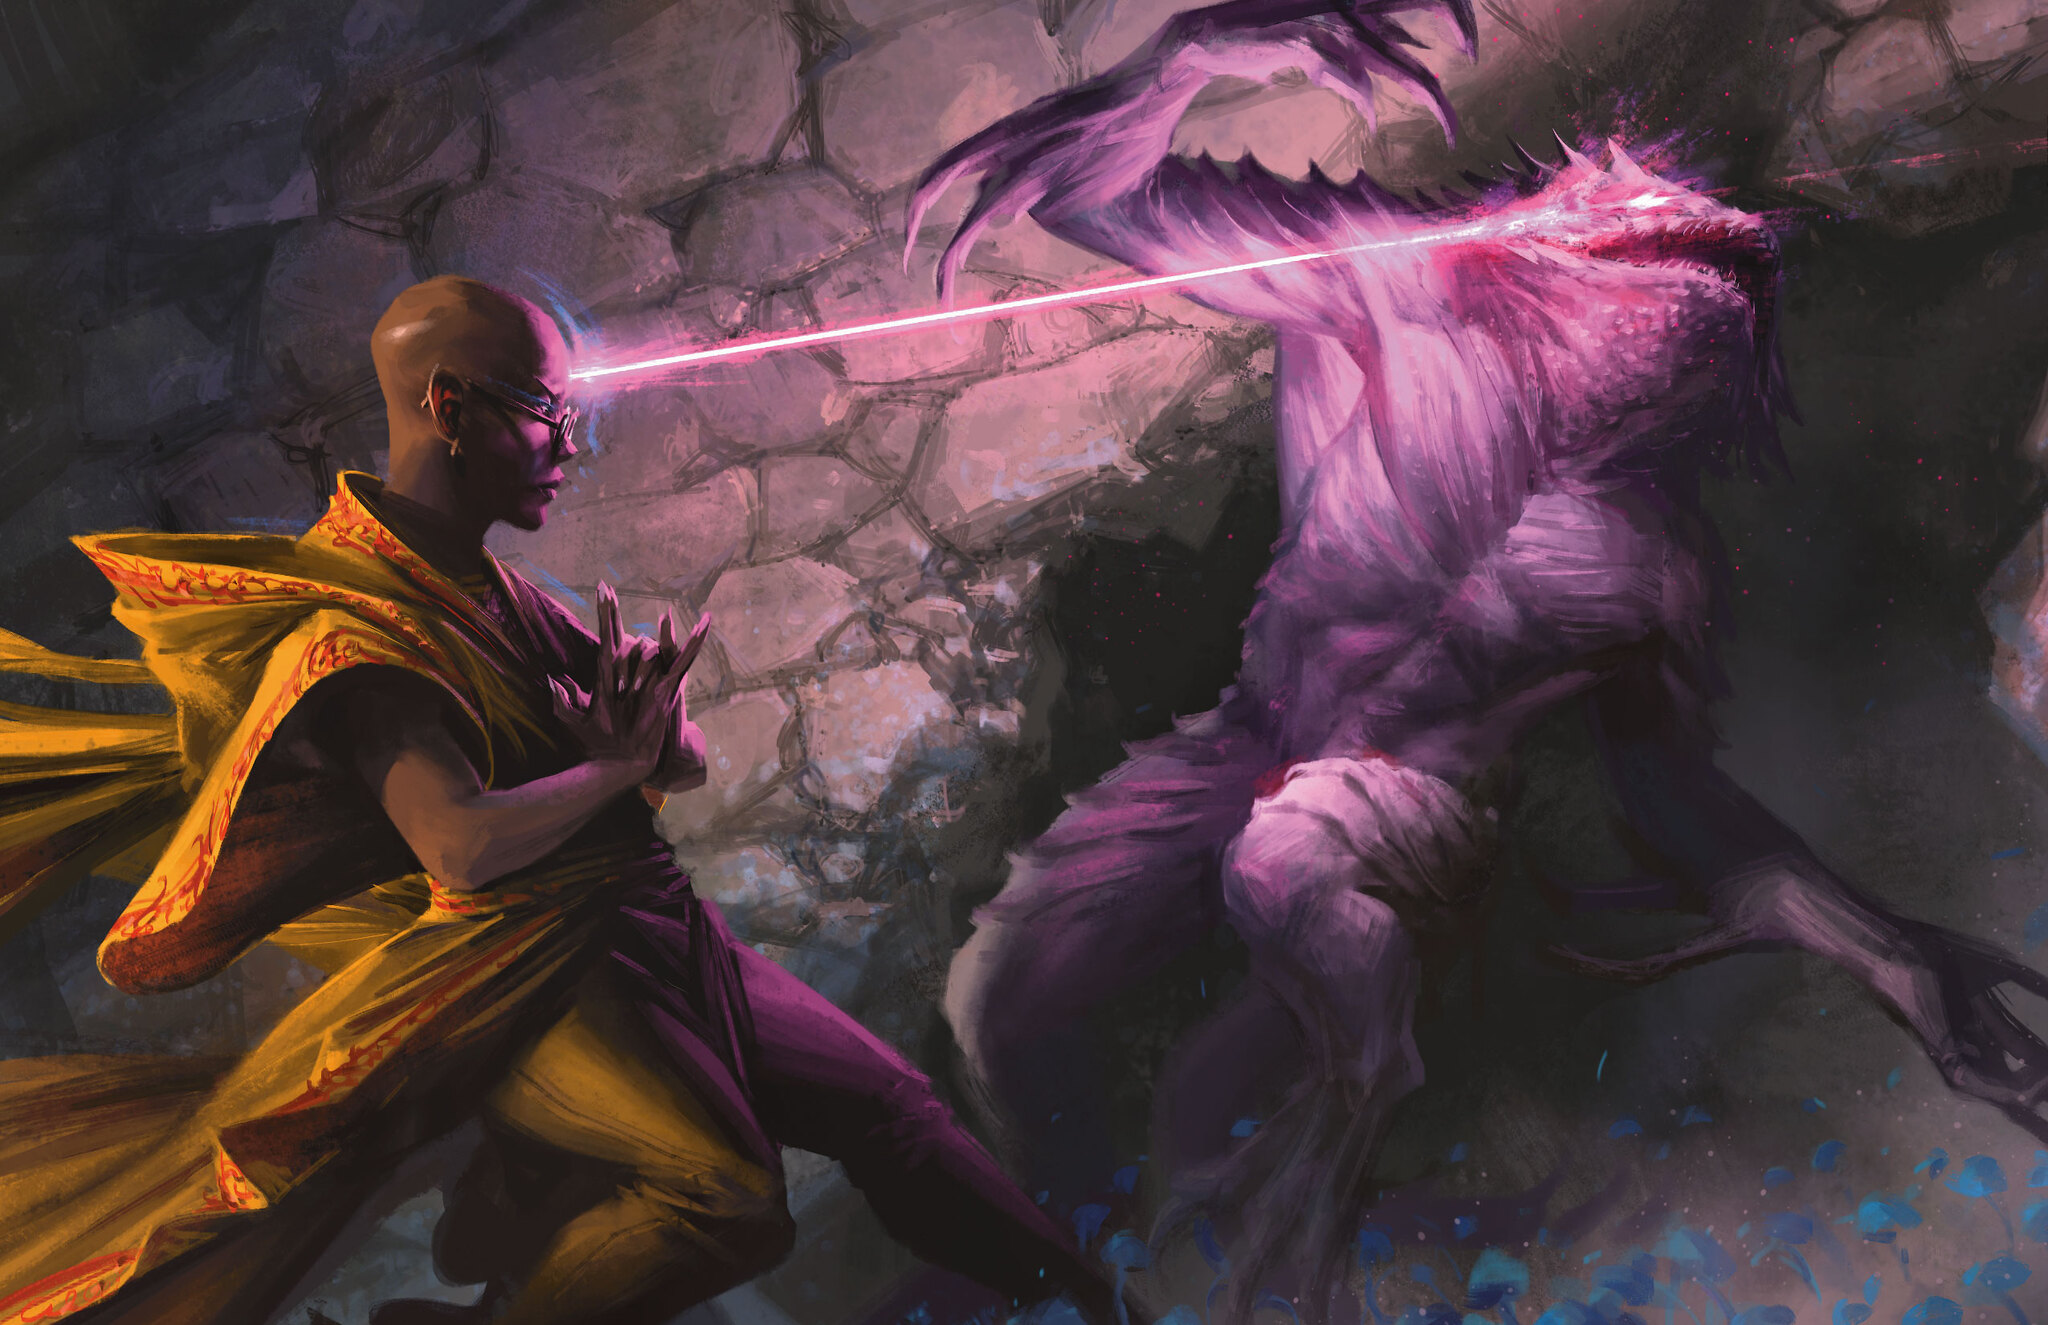 A suitably ticked-off Wizard zaps a troglodyte with Mind Sliver, one of several psionic spells featured in the book. (Image: Andrew Mar/Wizards of the Coast)